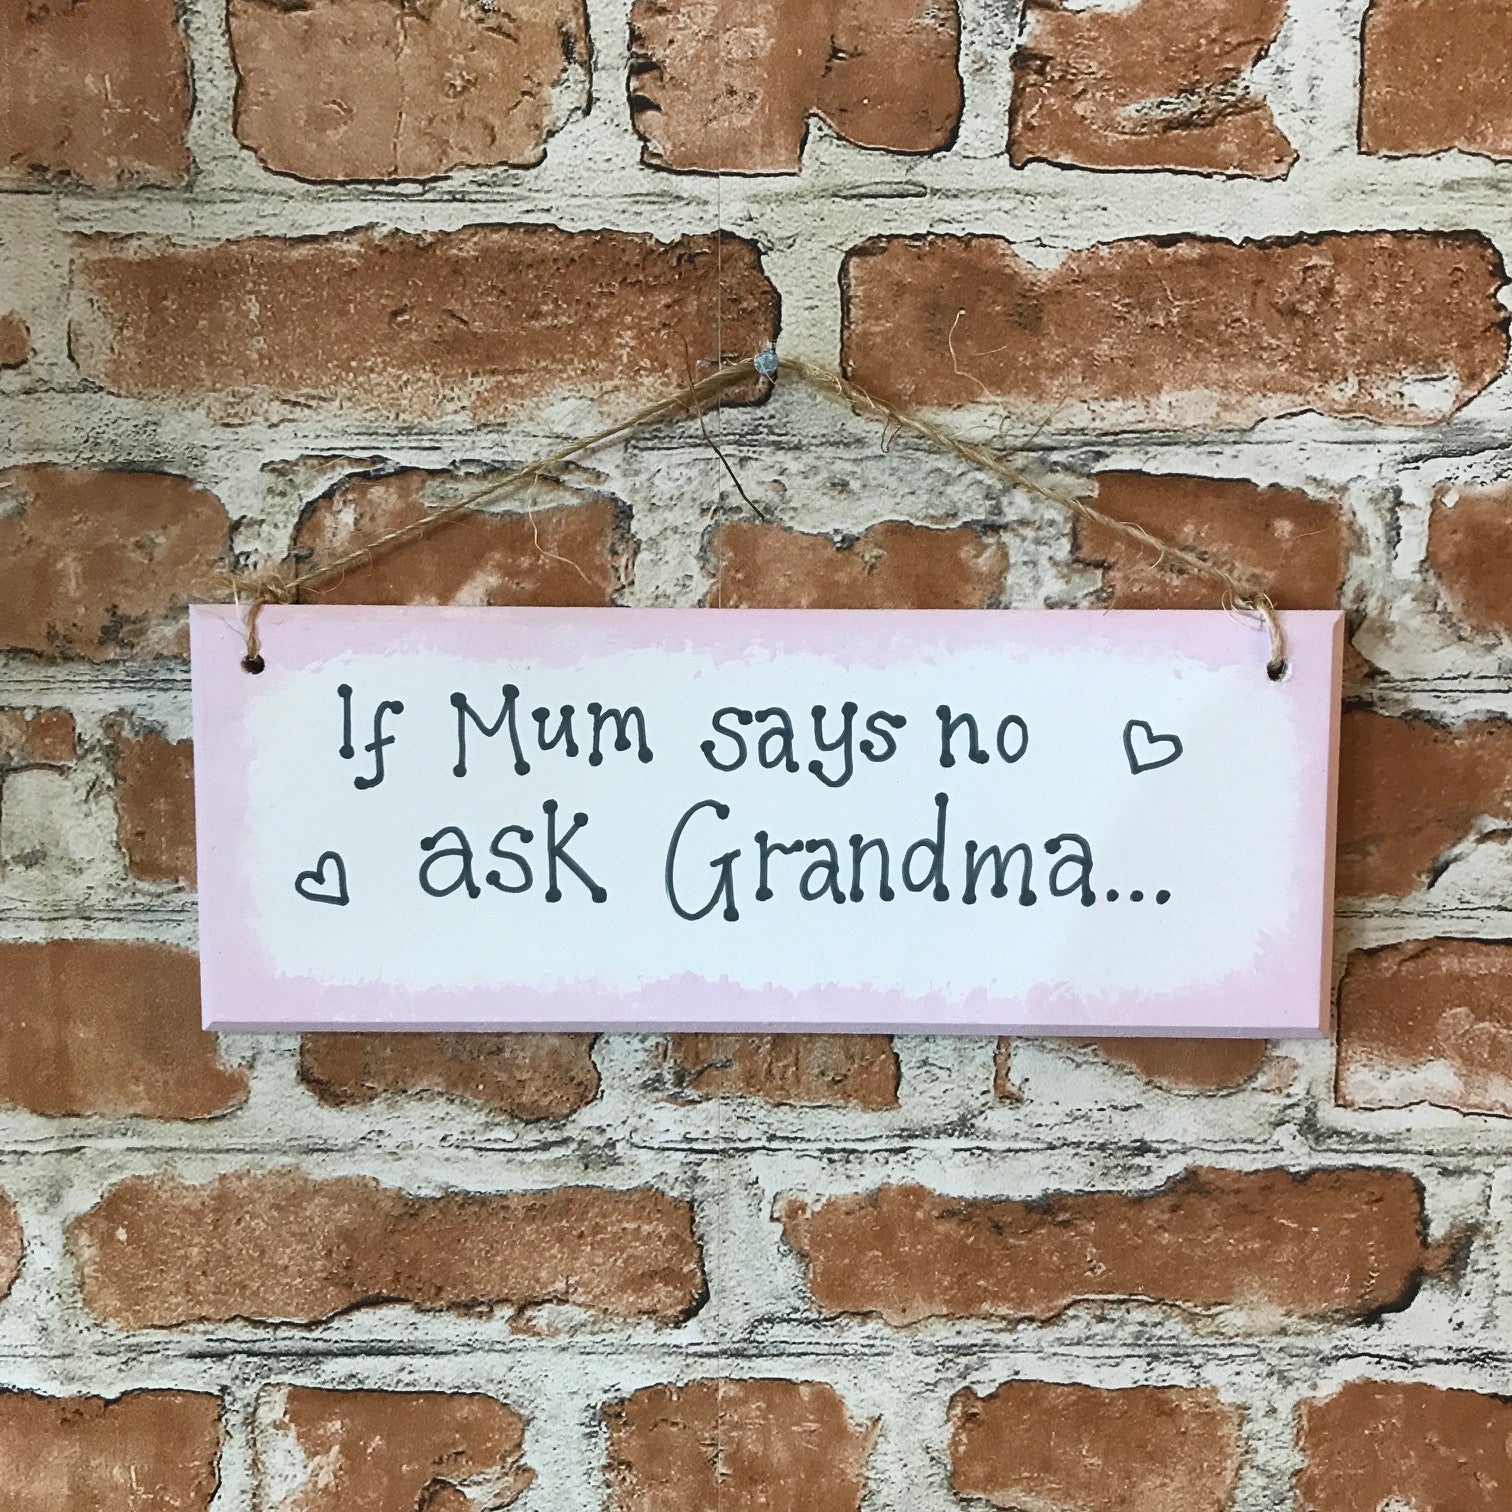 If Mum says no ask Grandma - Handmade Wooden Plaque from The Wrong End of Town